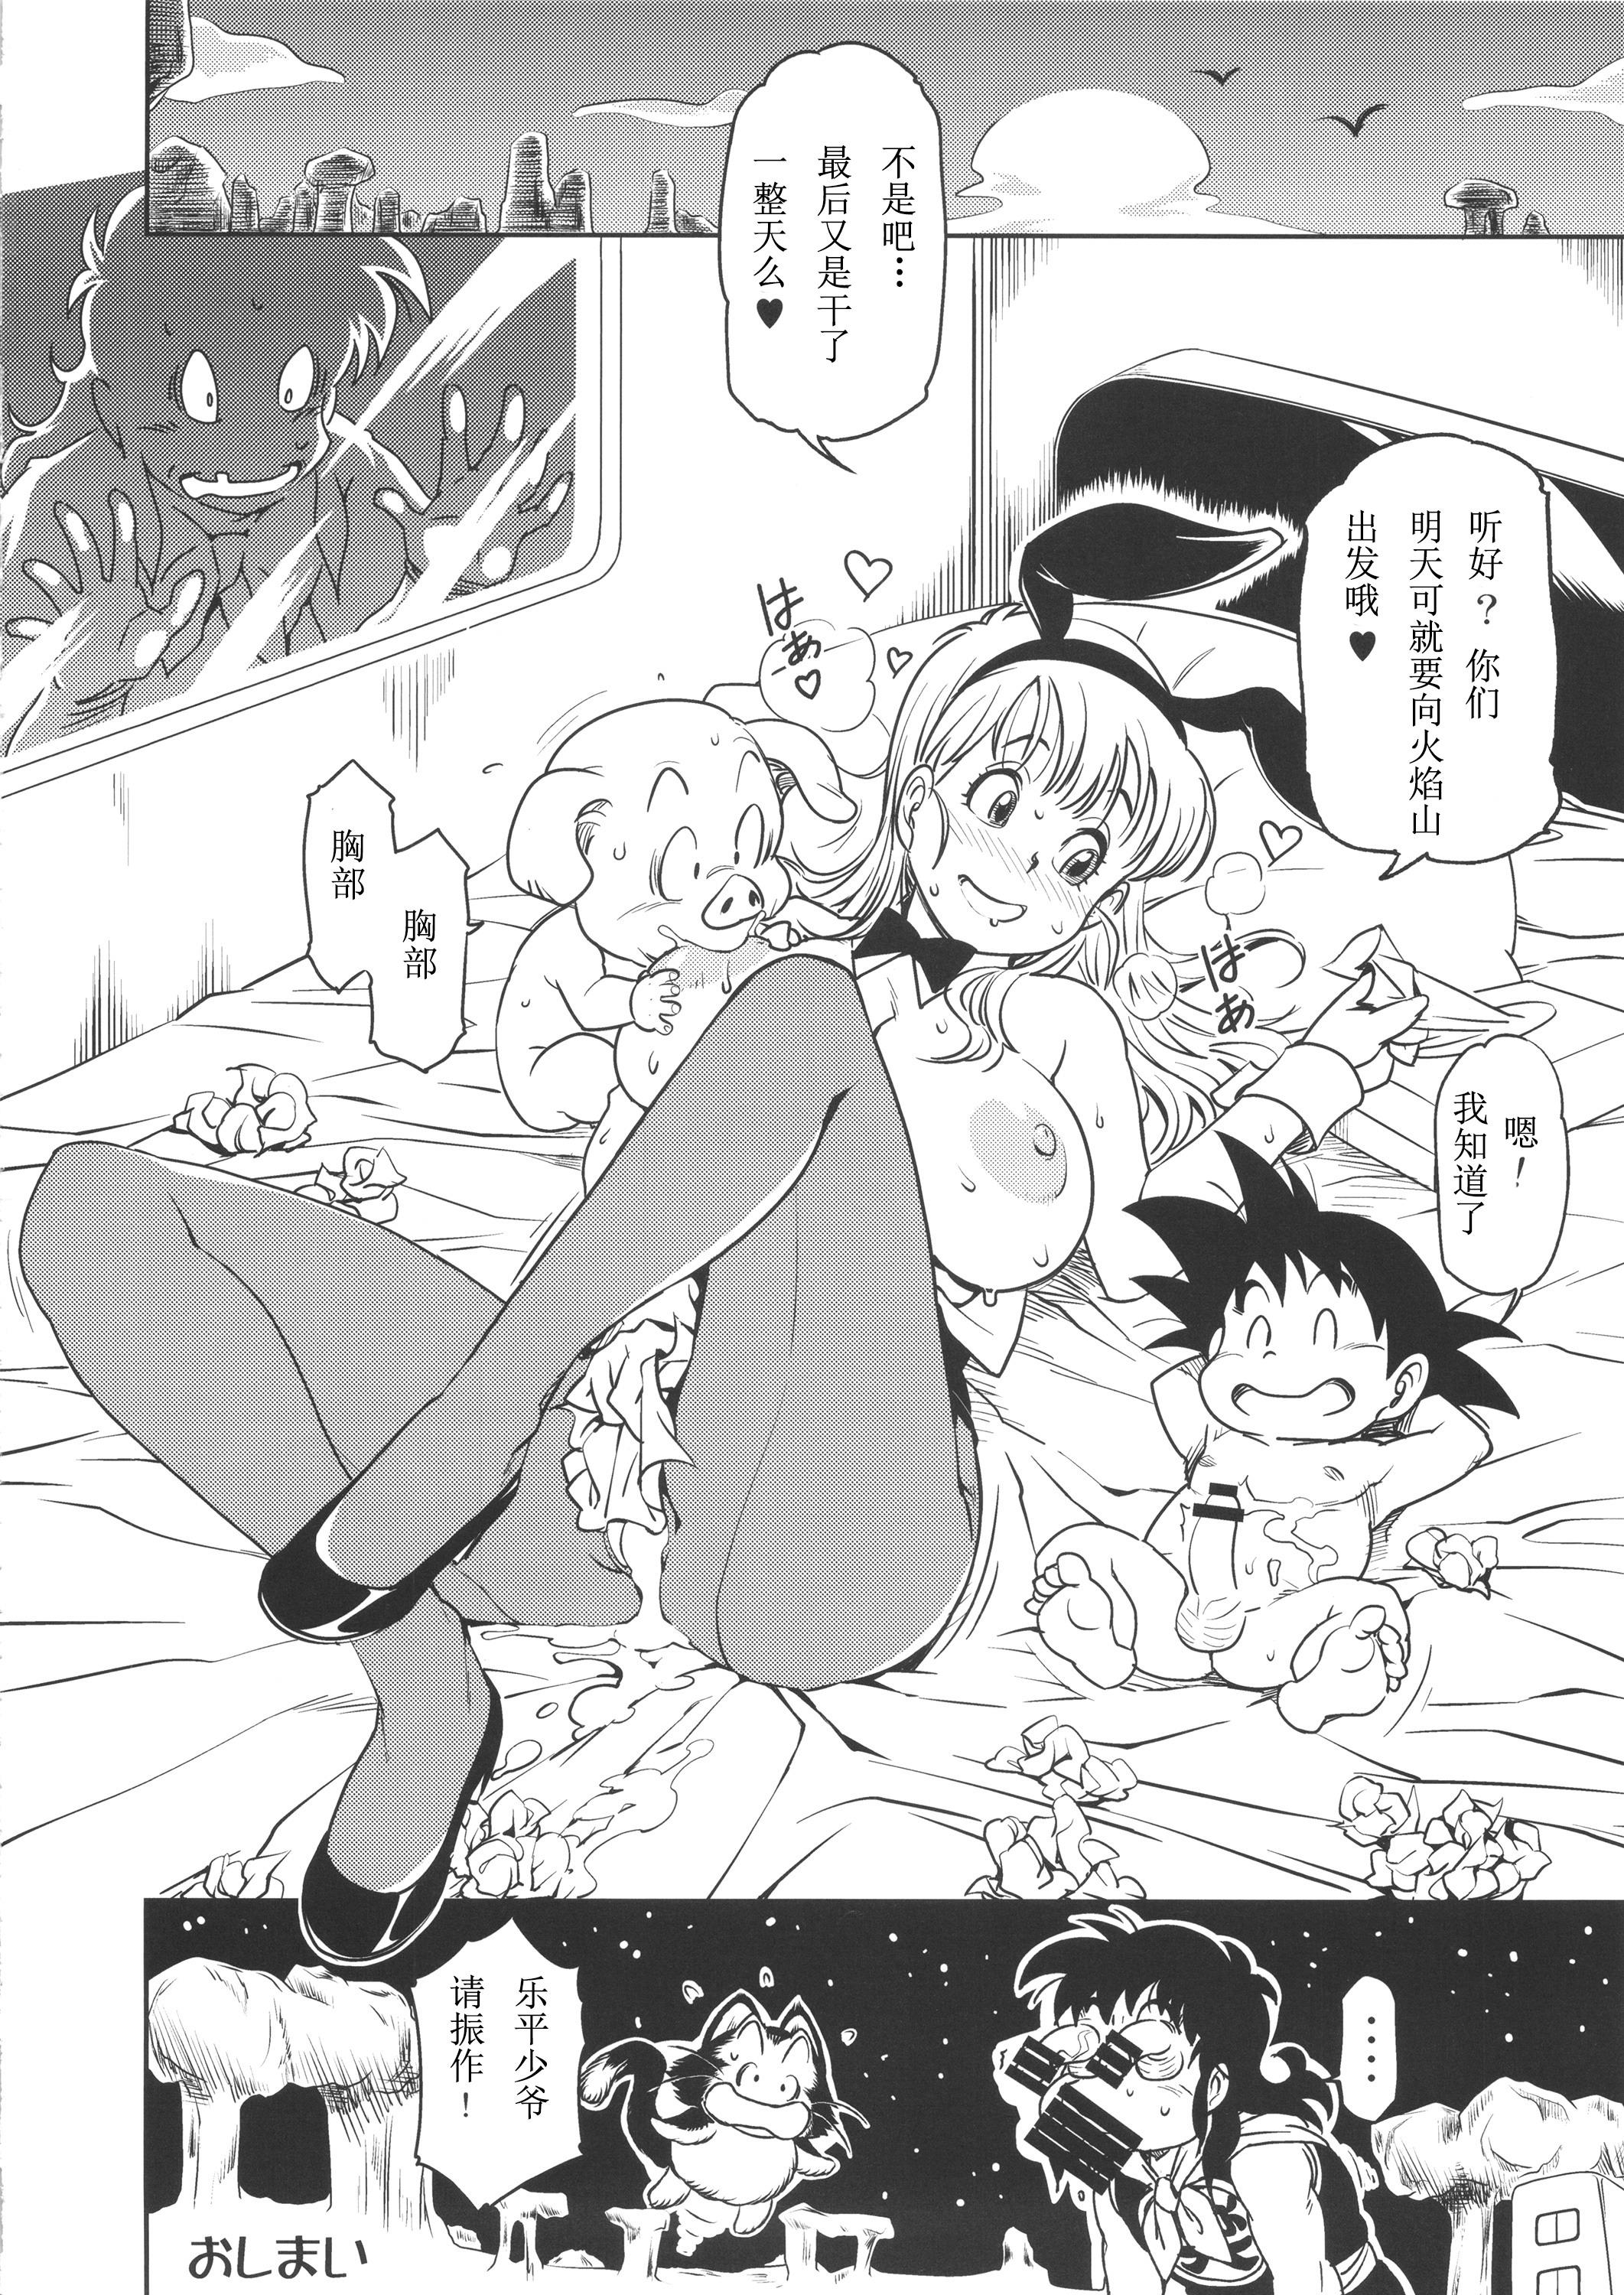 Eromangirl Page 23 Of 24 dragon ball hentai haven, Eromangirl Page 23 Of 24...